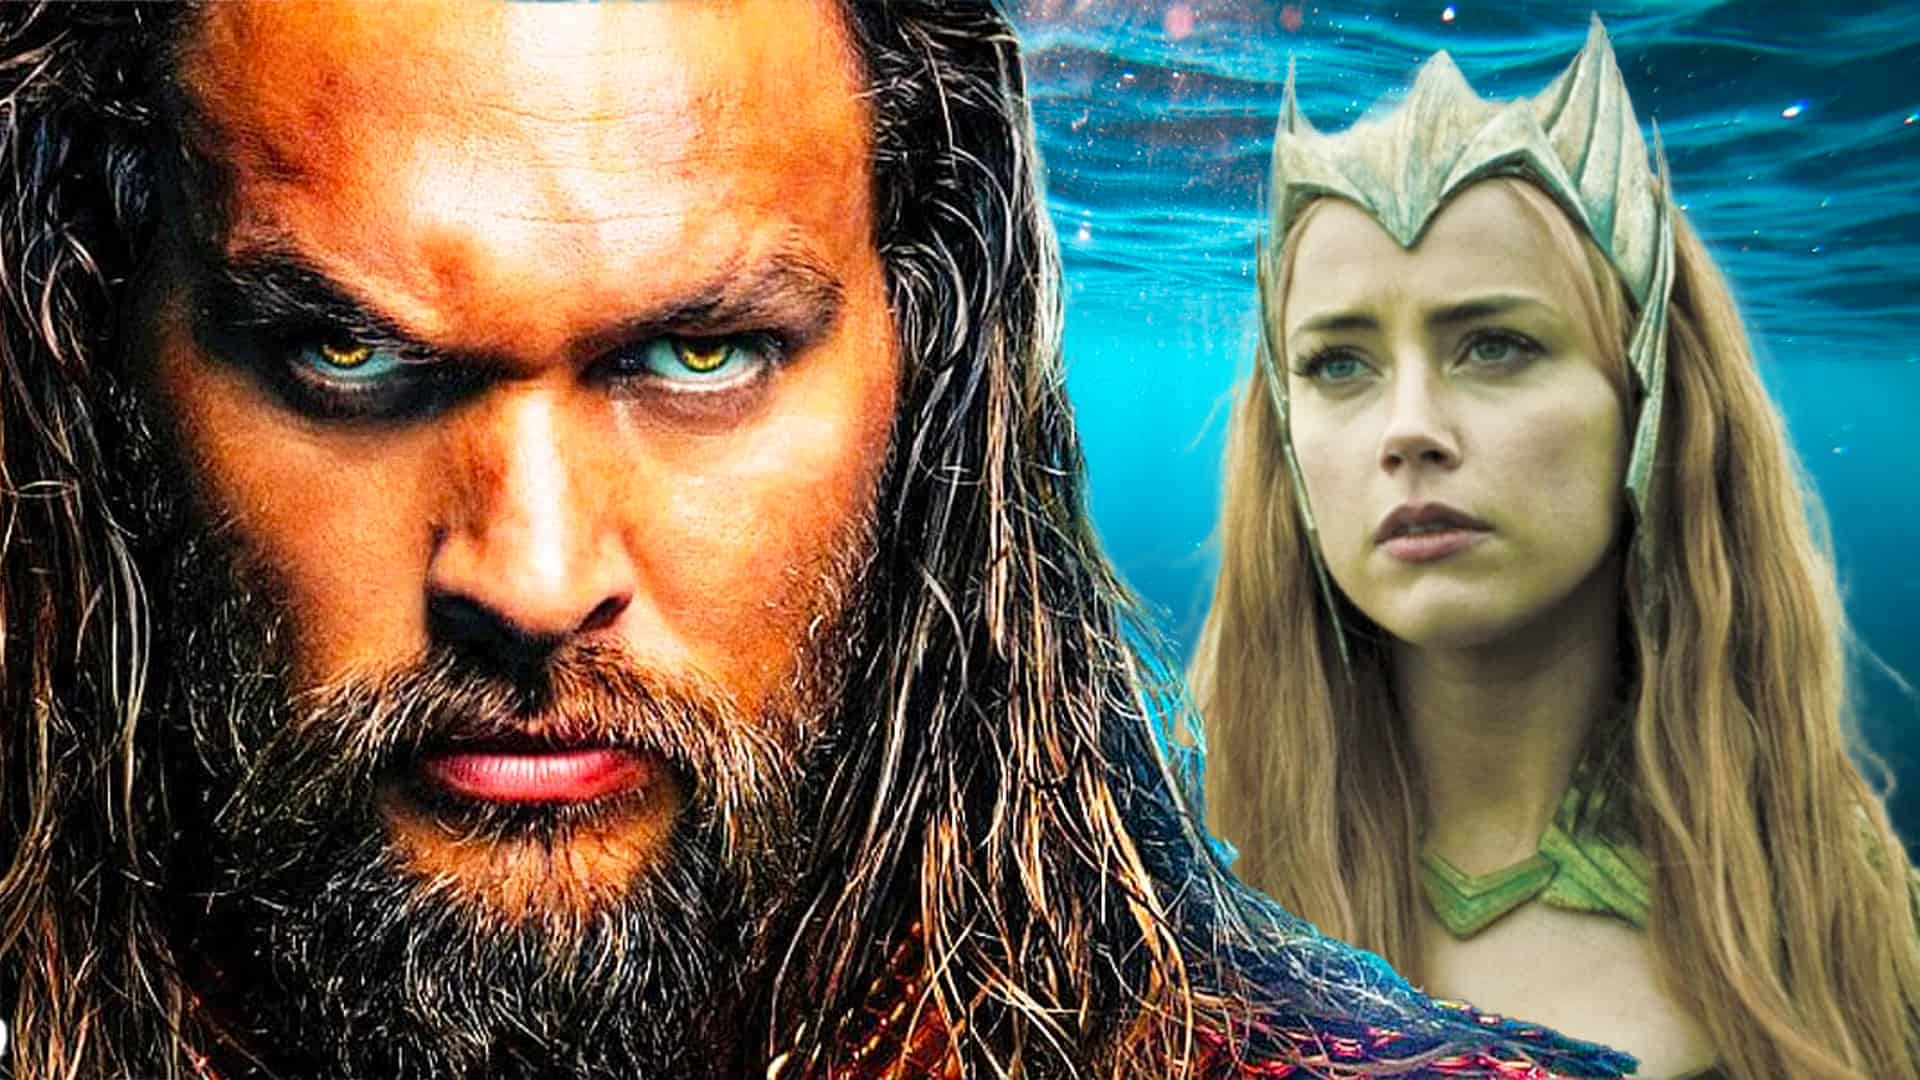 Aquaman 2: Will Blonde Hair Be a Major Theme in the Sequel? - wide 1